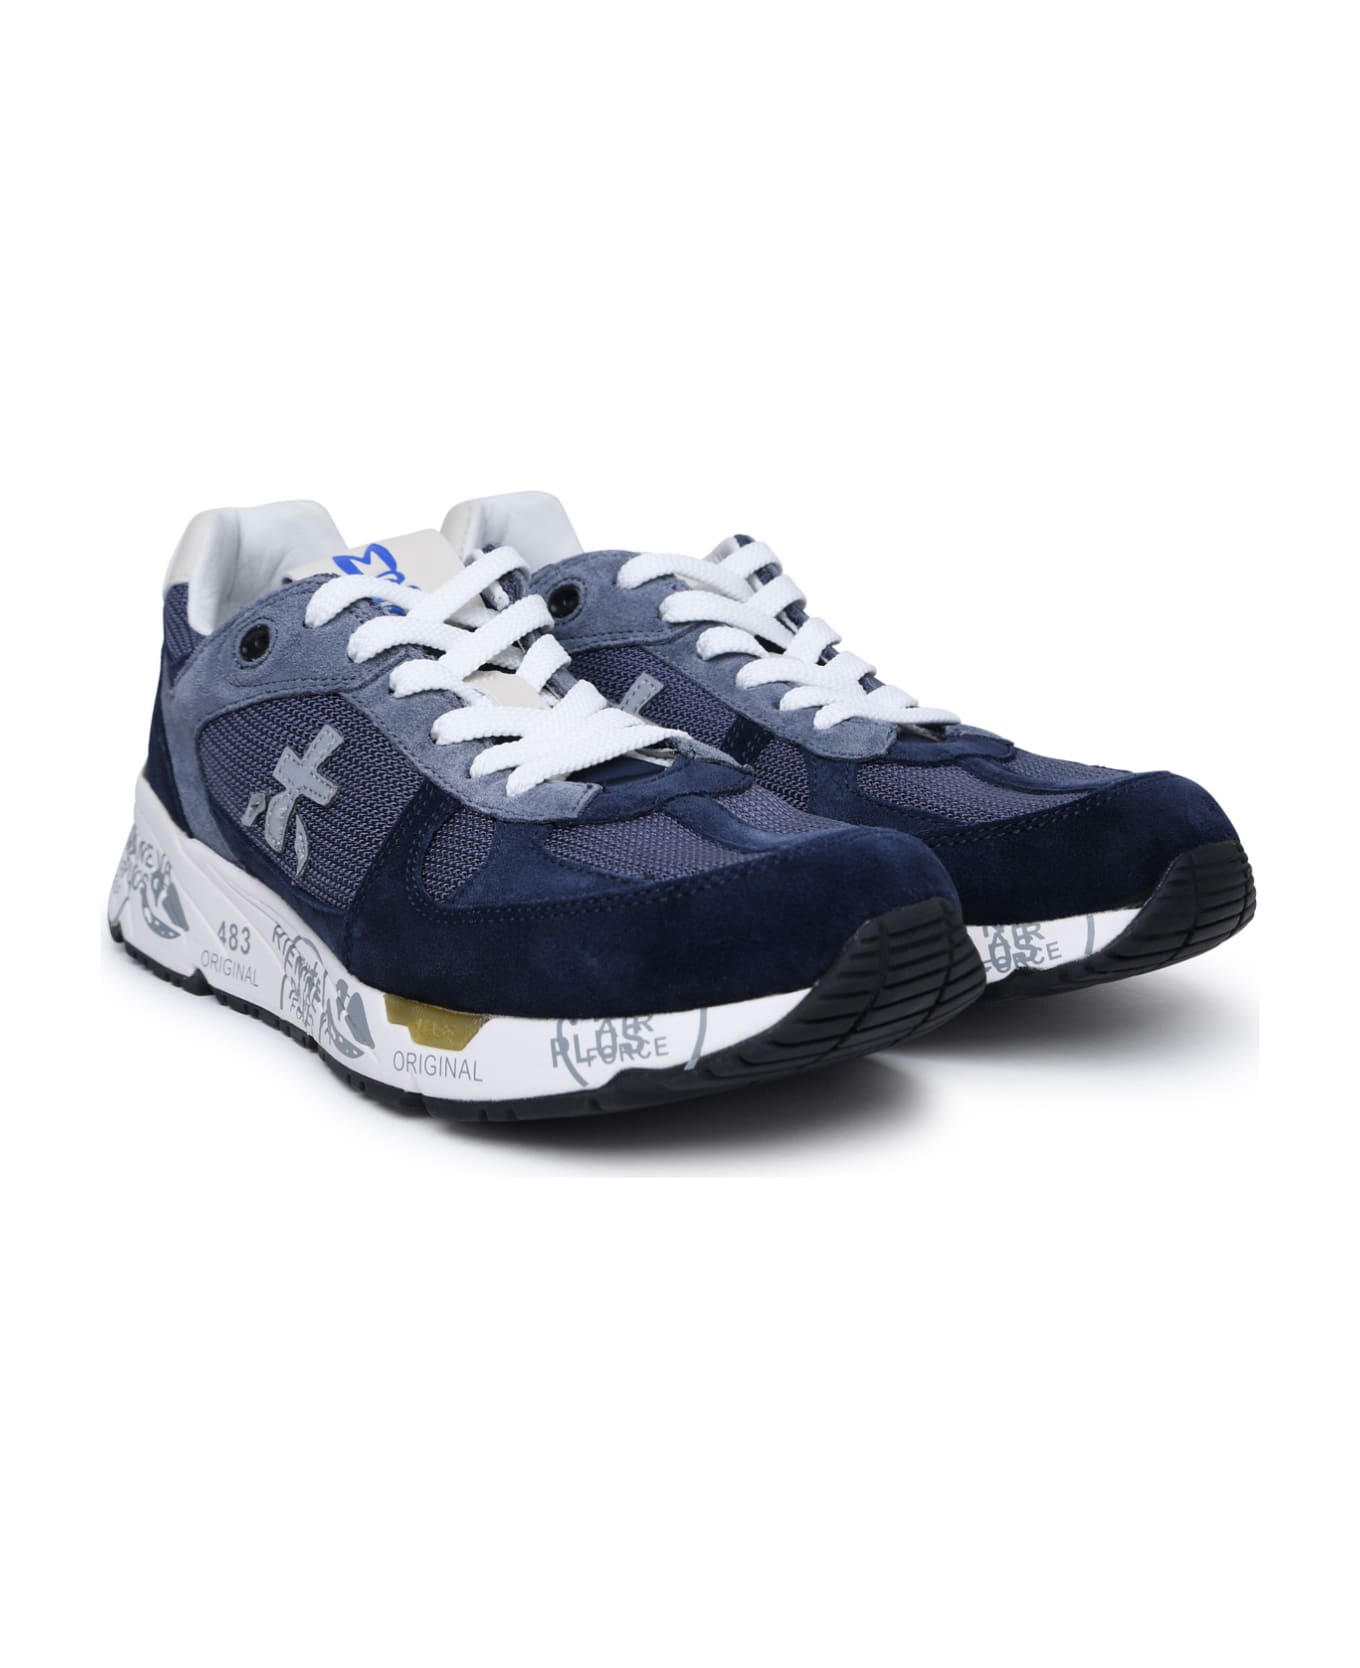 Premiata 'mase' Blue Leather And Fabric Sneakers - Blue